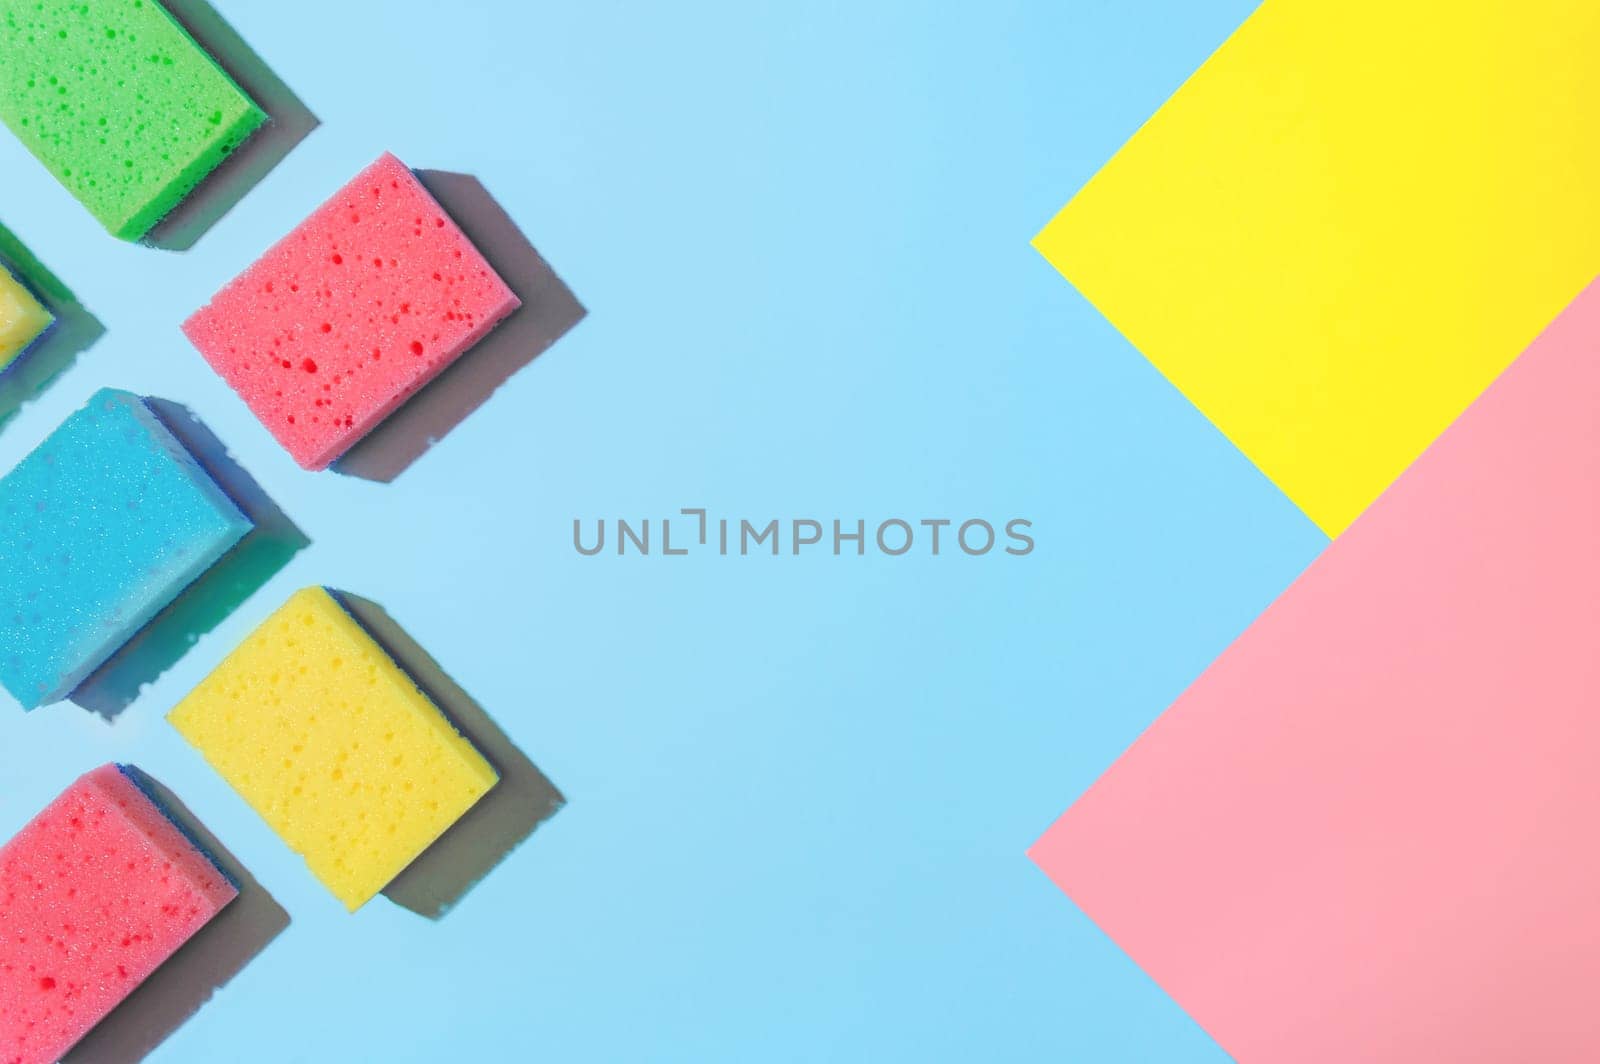 Bright and Colorful Cleaning Sponges: A Flat Lay for Cleaning Services or Housekeeping, copy space. Flat Lay of Cleaning Sponges: A Colorful, Bright and Eye-Catching Display for Cleaning Services.